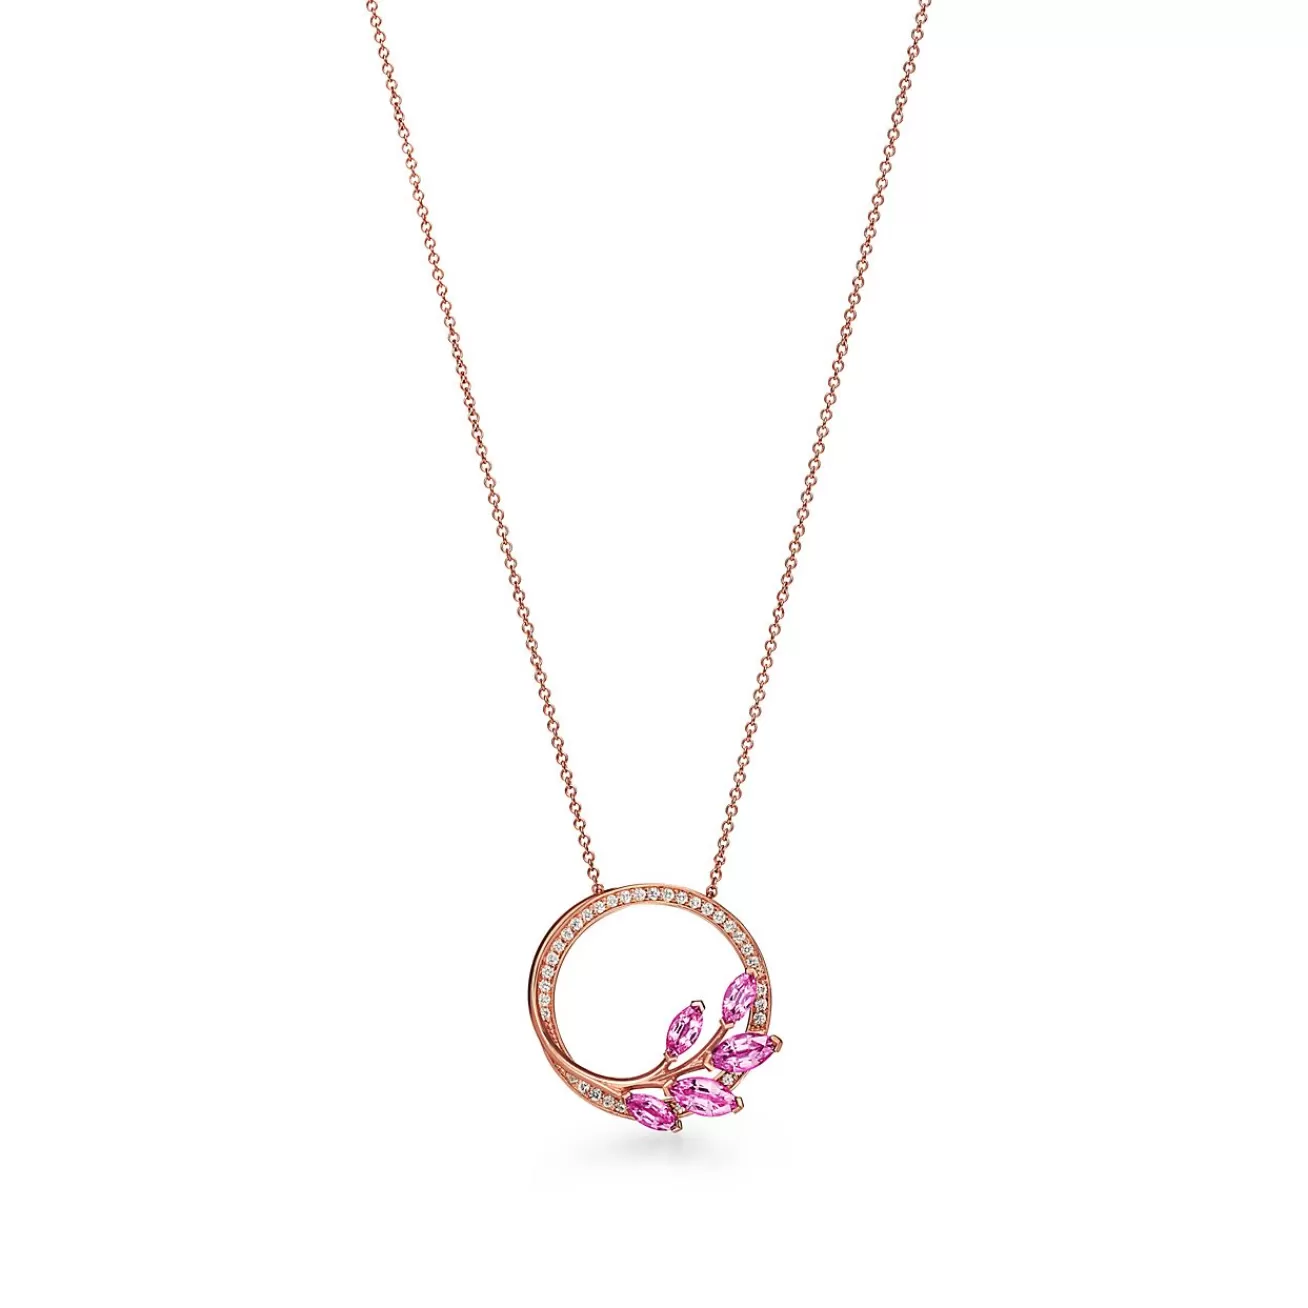 Tiffany & Co. Tiffany Victoria® Diamond Vine Circle Pendant with Pink Sapphires in Rose Gold | ^ Necklaces & Pendants | Gifts for Her